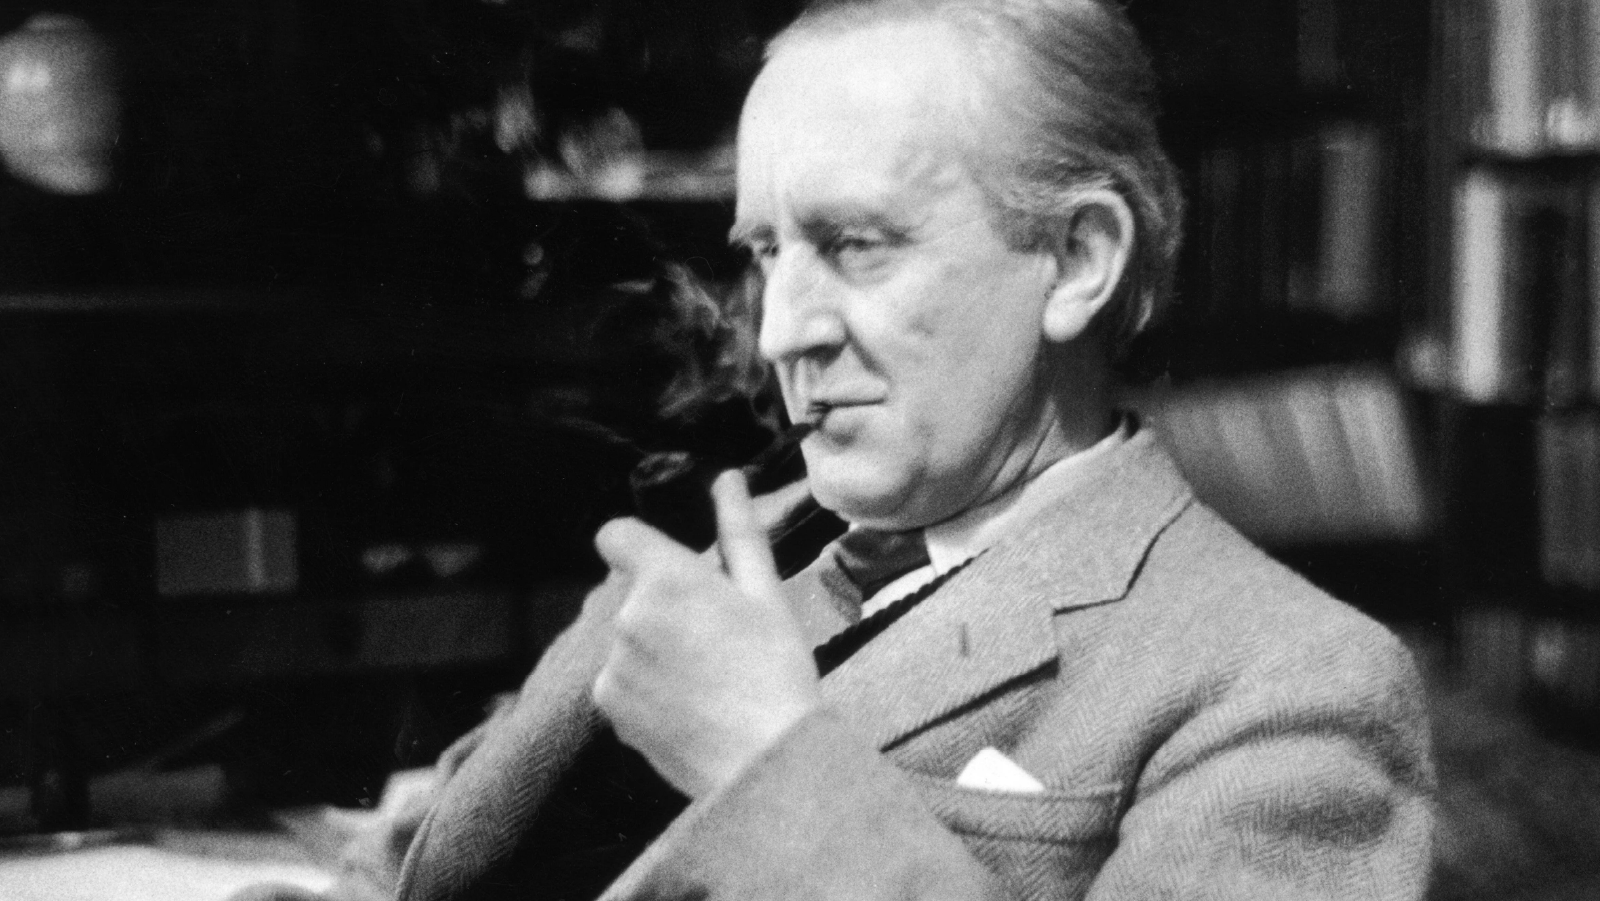 Tolkien sitting and smoking a pipe